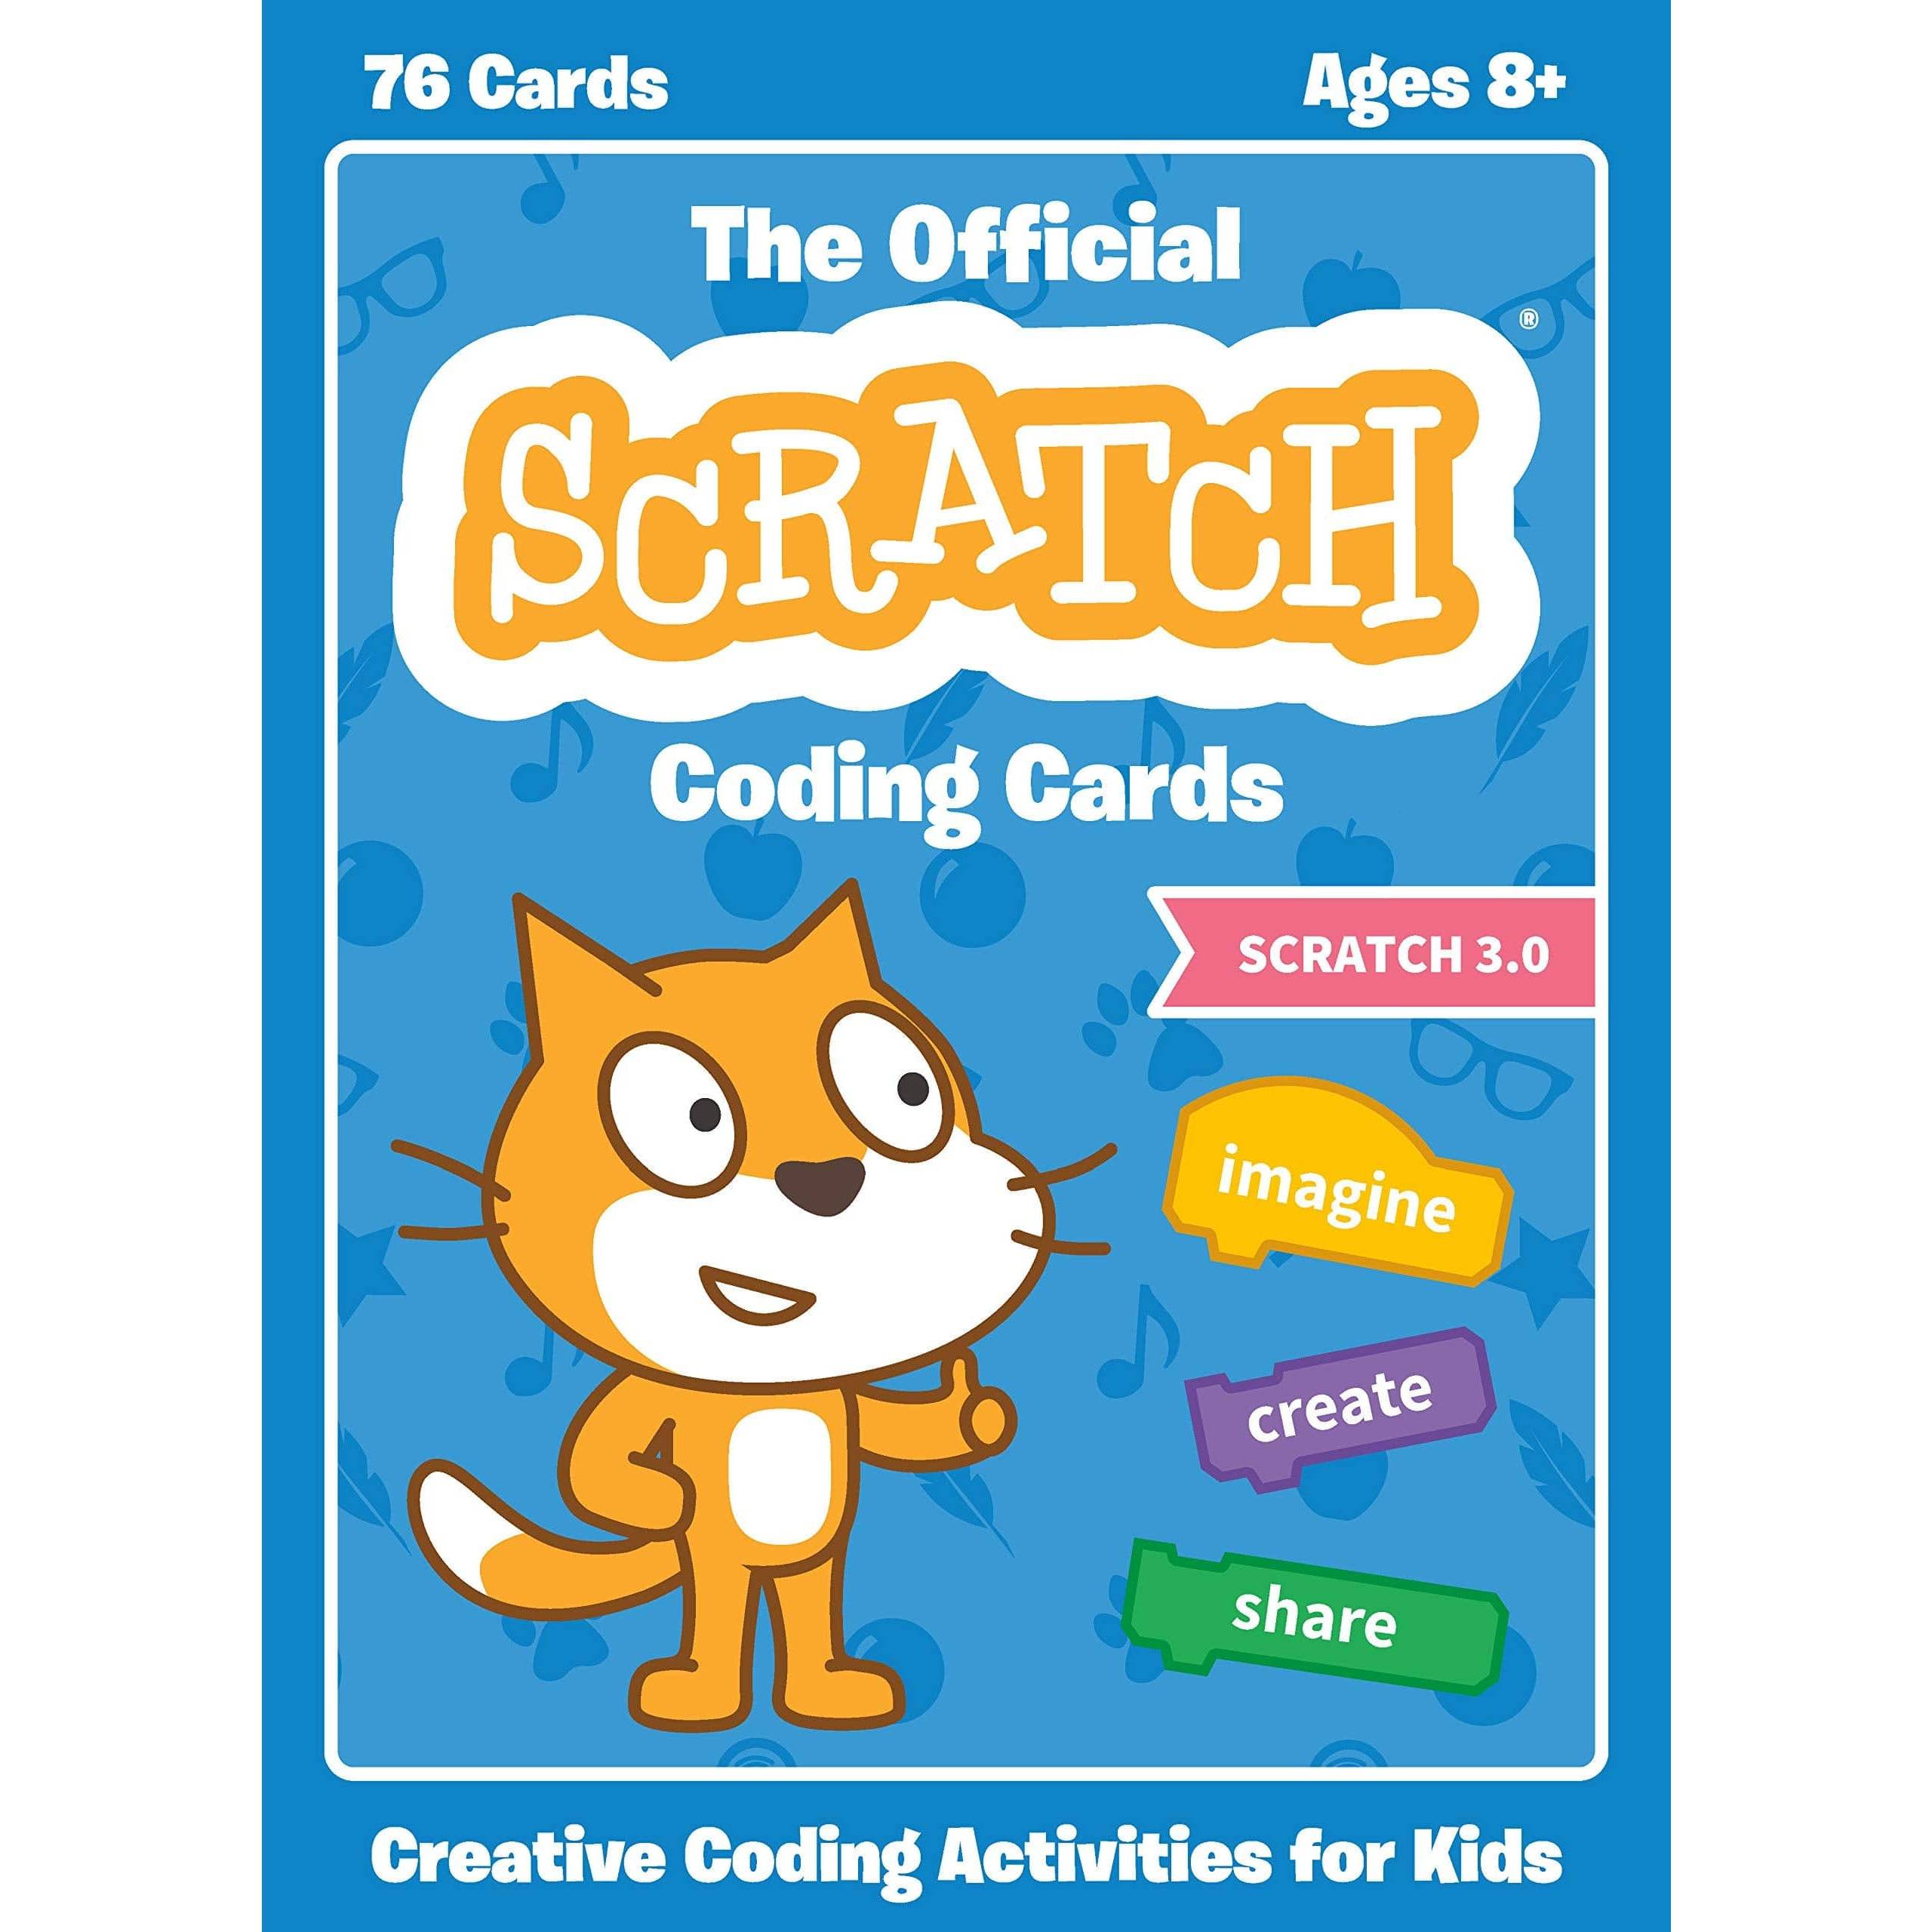 The Official Scratch Coding Cards (Scratch 3.0) - MakoStars Online Store